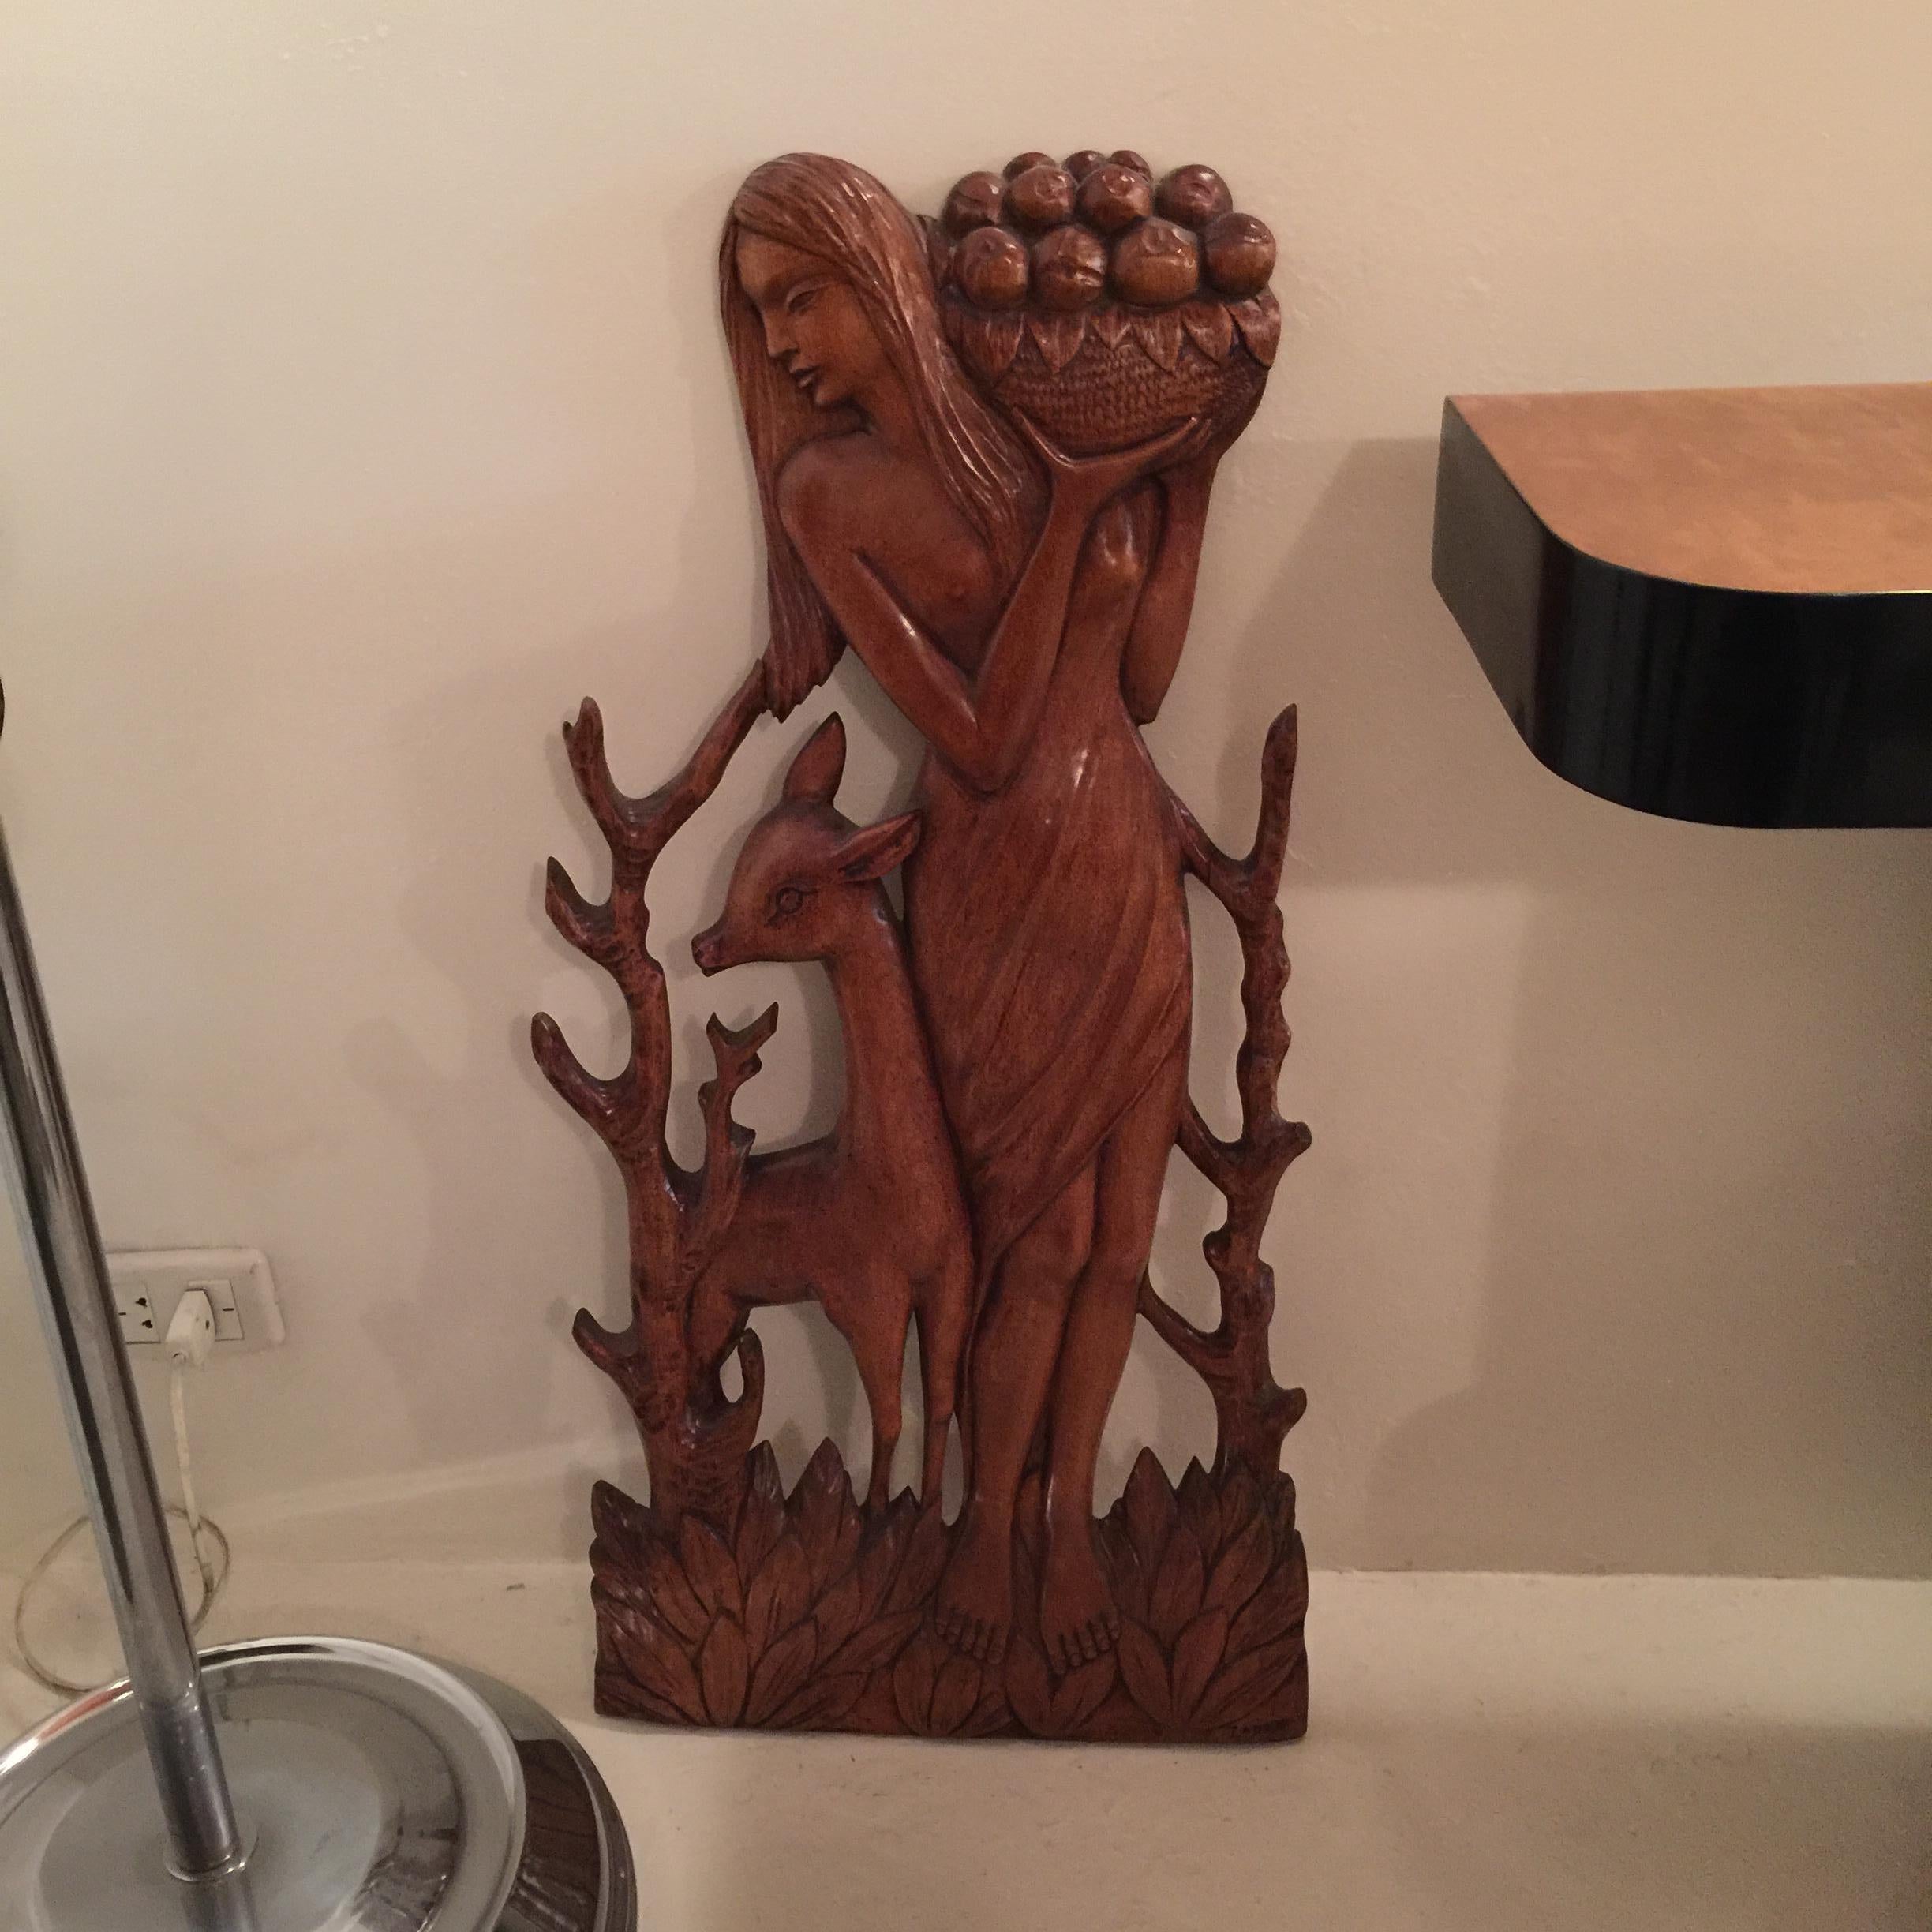 Amaizing woman

Material: wood
Country: France
We have specialized in the sale of Art Deco and Art Nouveau and Vintage styles since 1982. If you have any questions we are at your disposal.
Pushing the button that reads 'View All From Seller'. And